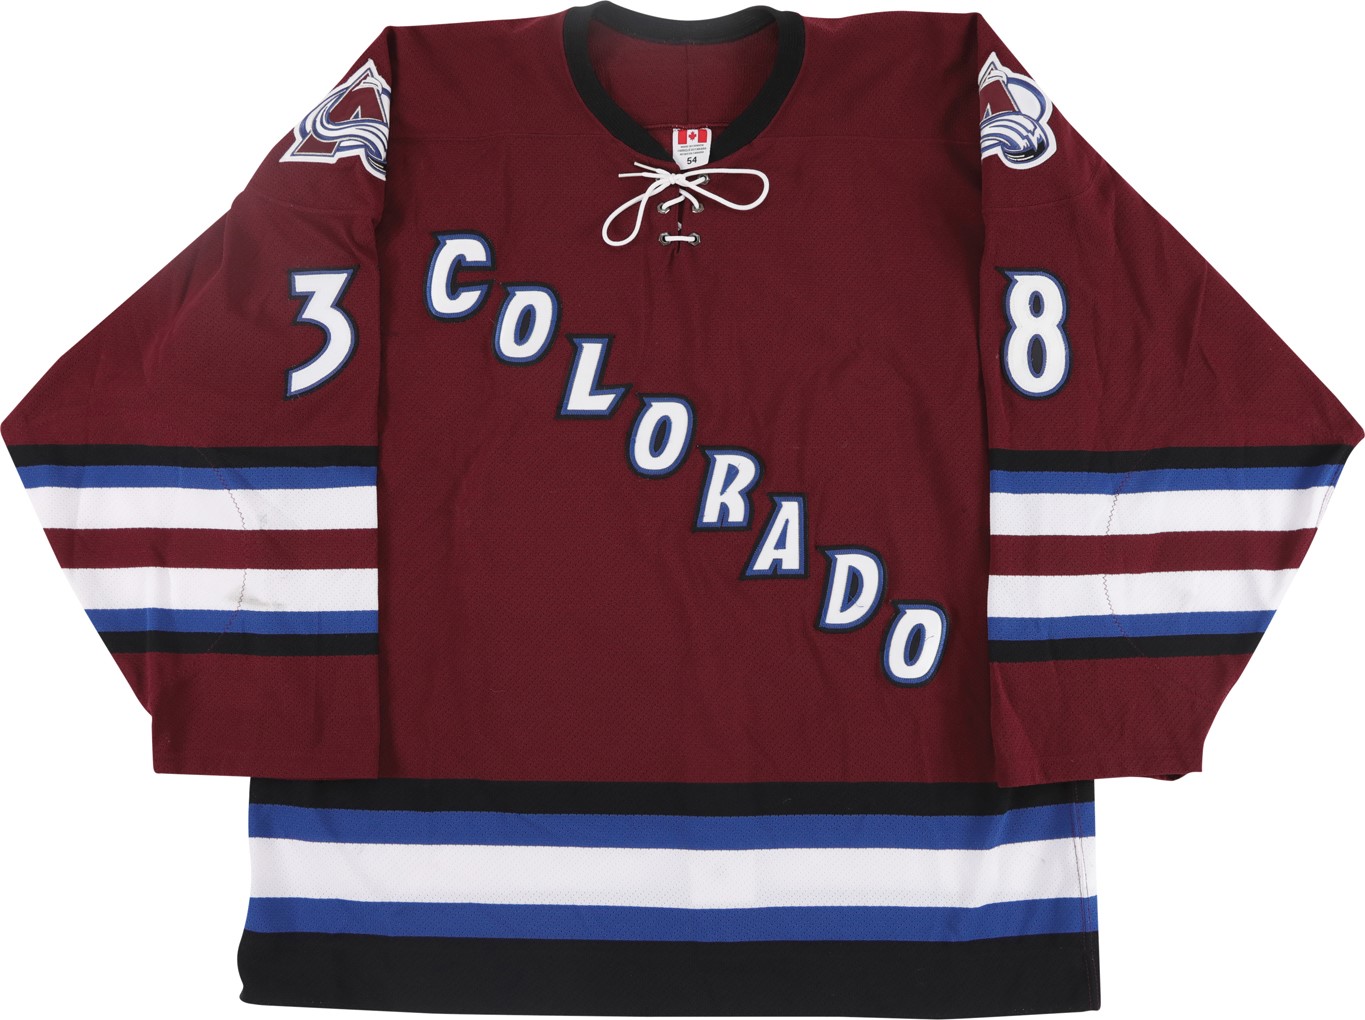 Hockey - 2004 Matthew Barnaby Colorado Avalanche Game Worn "Goal" Jersey - Rare Alternate Style! (Photo-Matched & MeiGray)